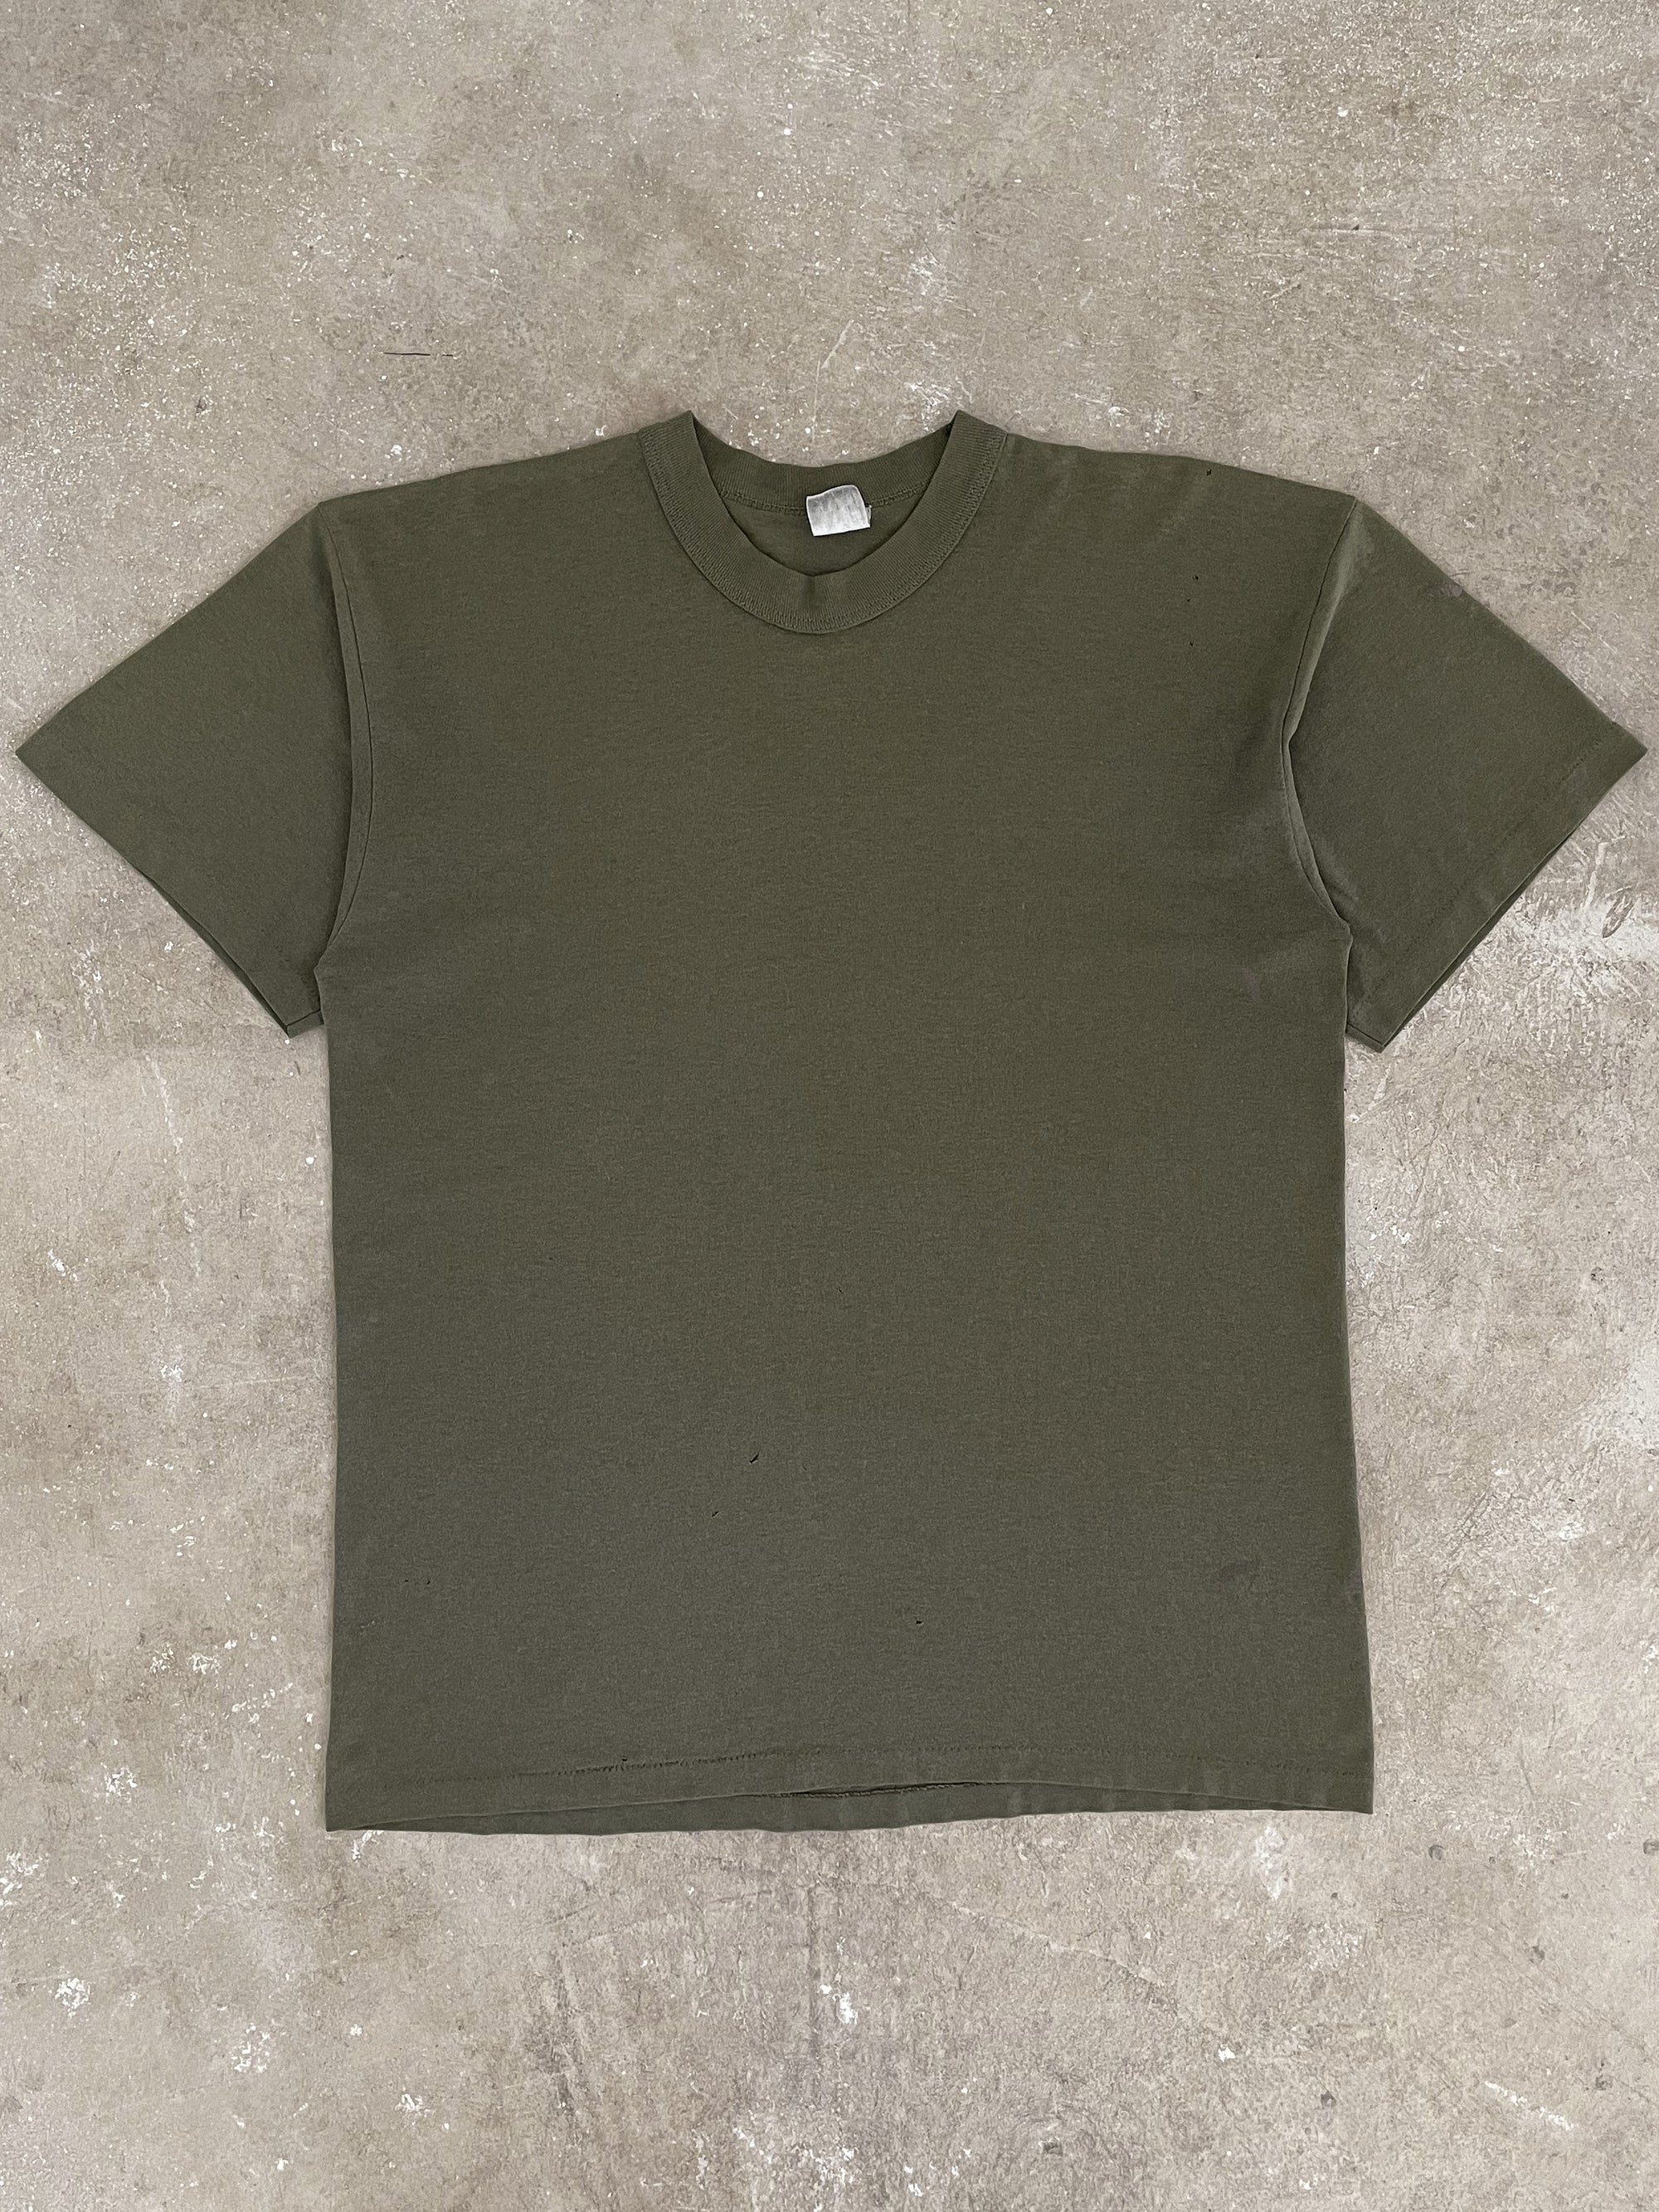 1990s Faded Olive Tee (L)